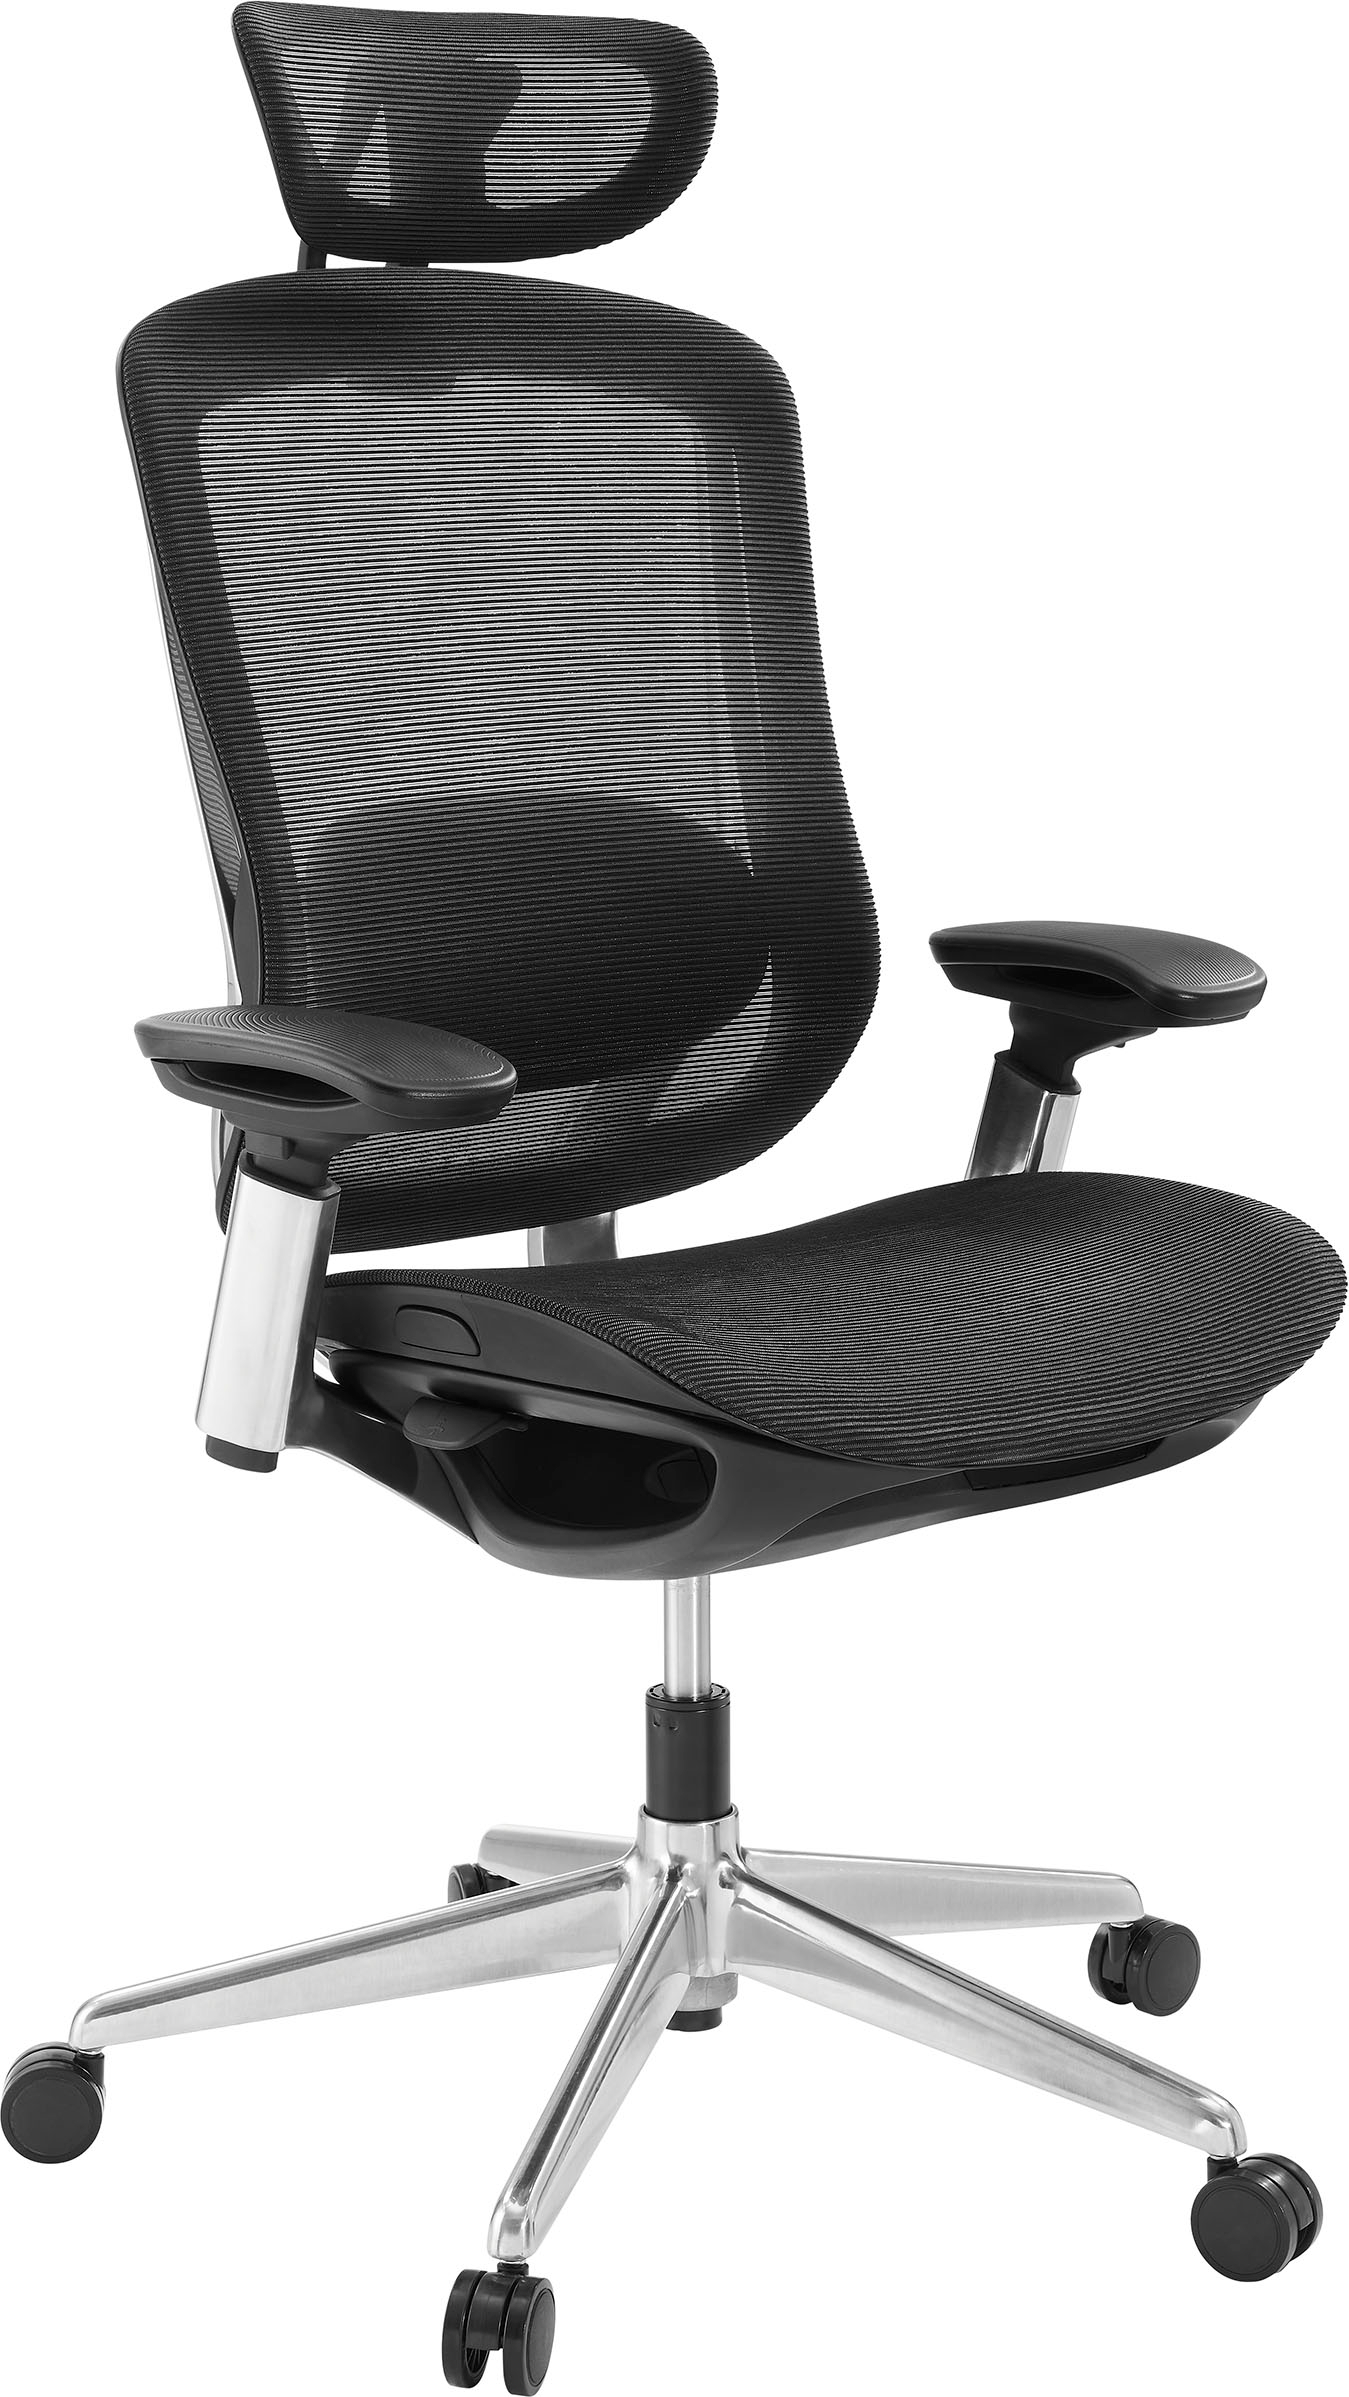 Angle View: Insignia™ - High Back Executive Ergonomic Chair with Adjustable Headrest - Black